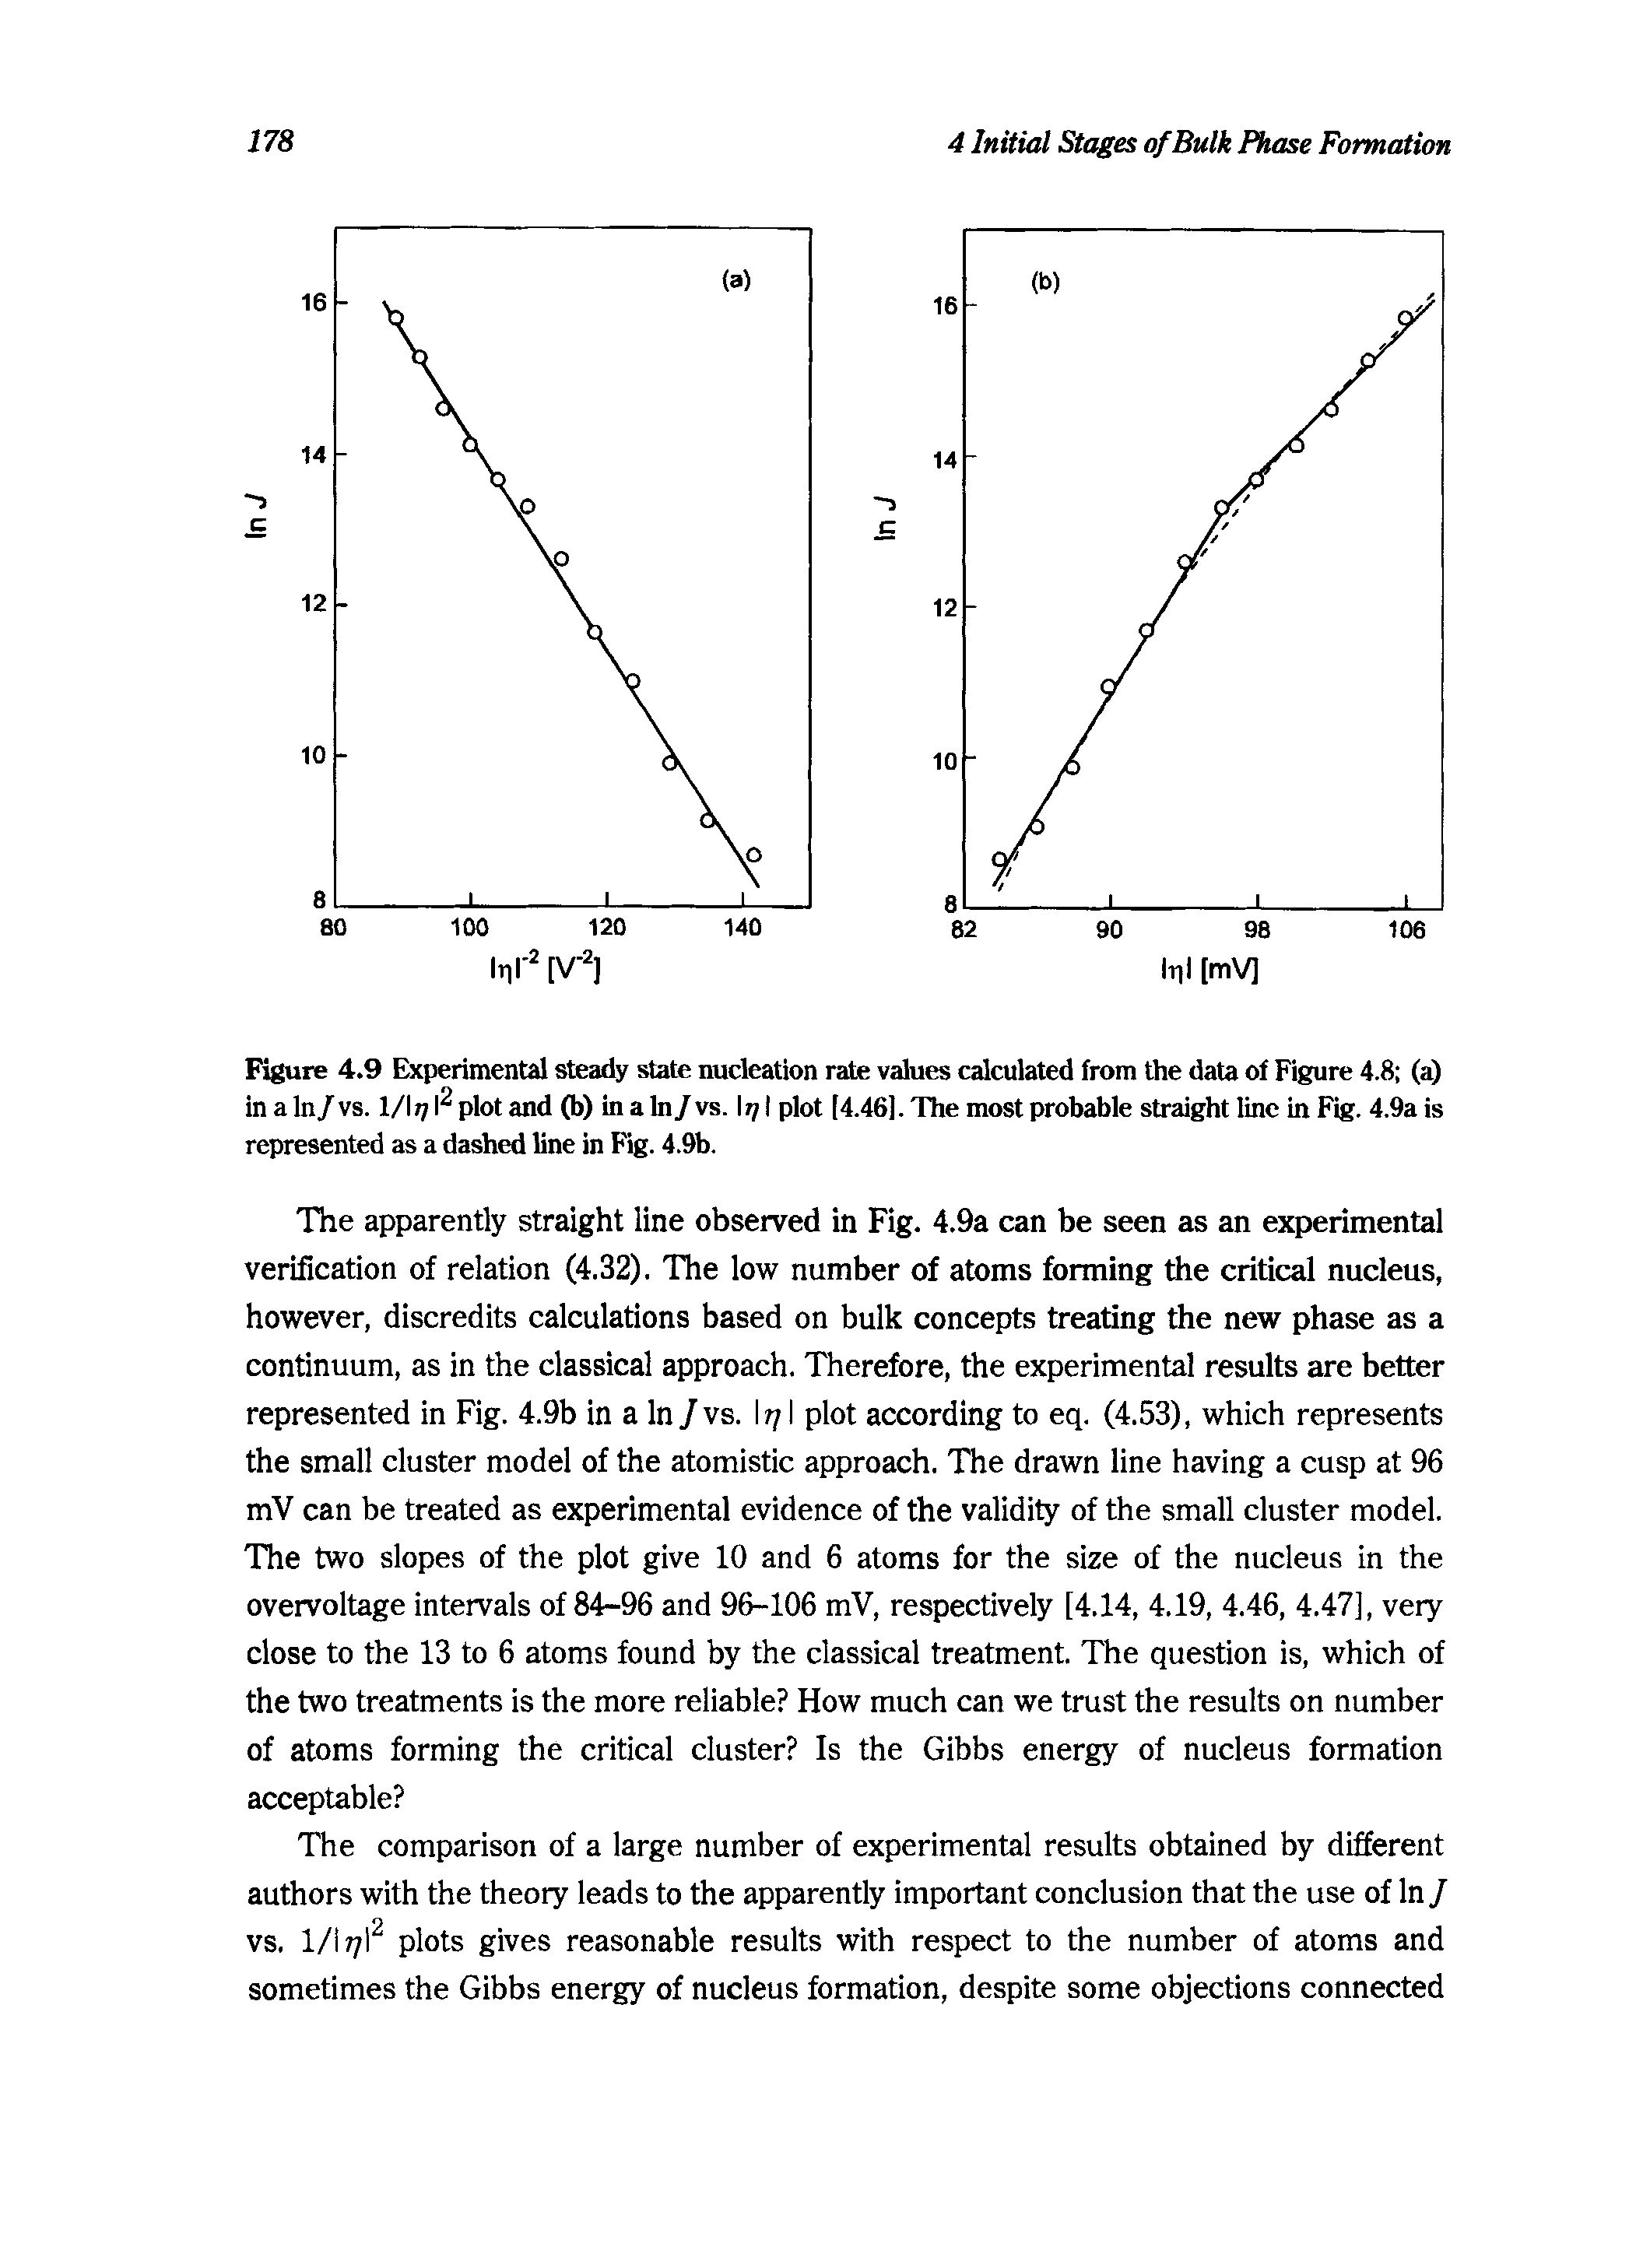 Figure 4.9 Experimental steady state nucleation rate values calculated from the data of Figure 4.8 (a) in a In/vs. 1/1 1 plot and (b) in a In/vs. I /1 plot [4.46], The most probable straight line in Fig. 4.9a is represented as a dashed line in Fig. 4.9b.